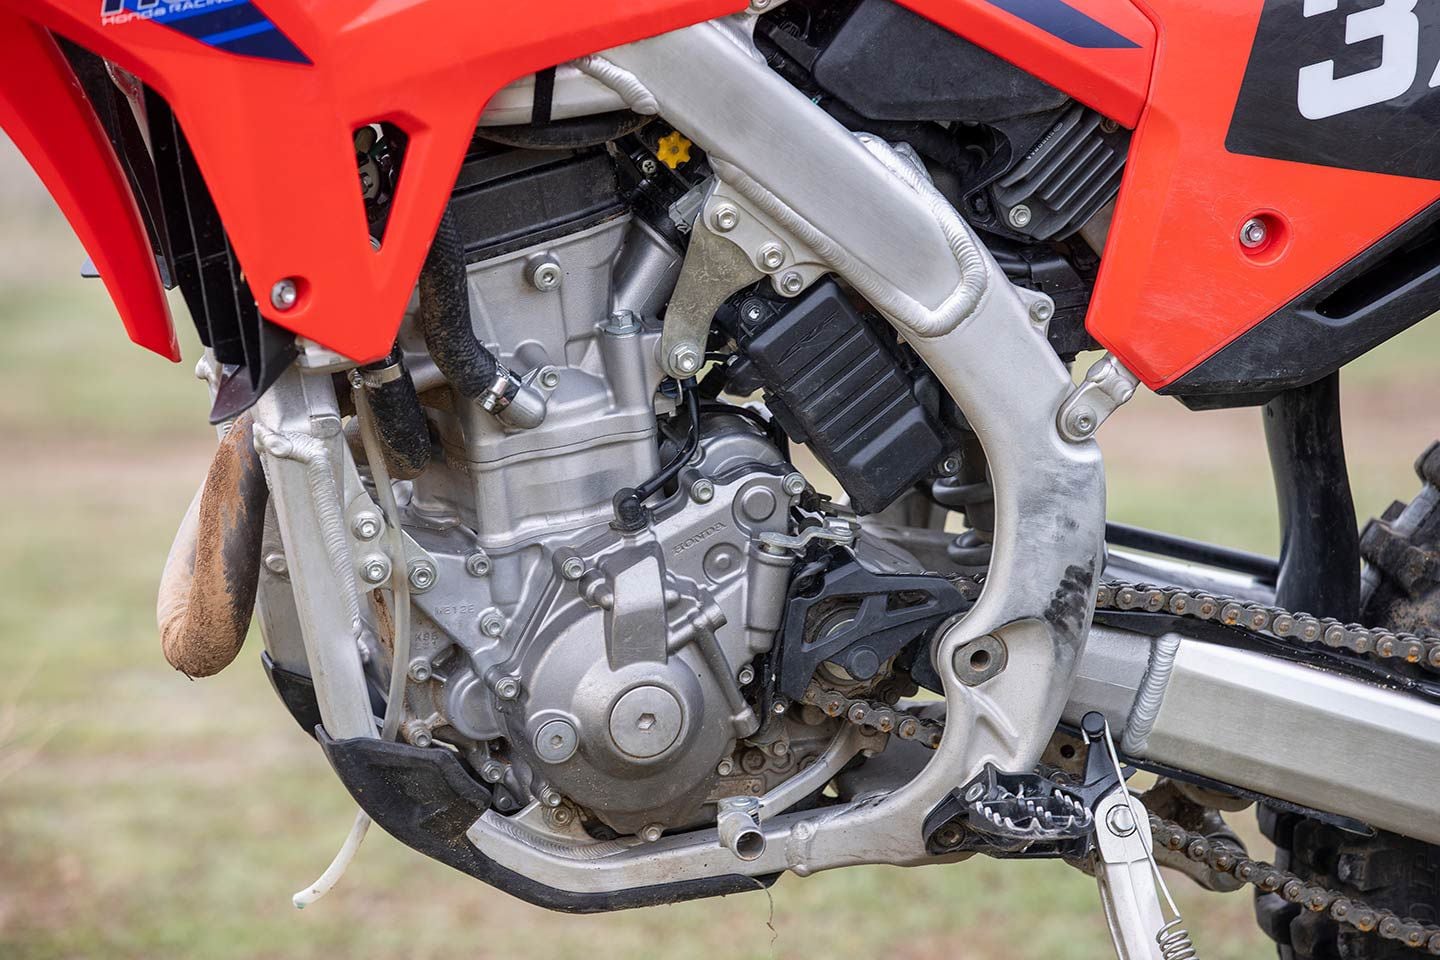 The CRF250RX is powered by a water-cooled 249cc single. It pumps out 38 horsepower at the Geomax AX81 tire and offers more hill-conquering torque versus the ‘21 version.